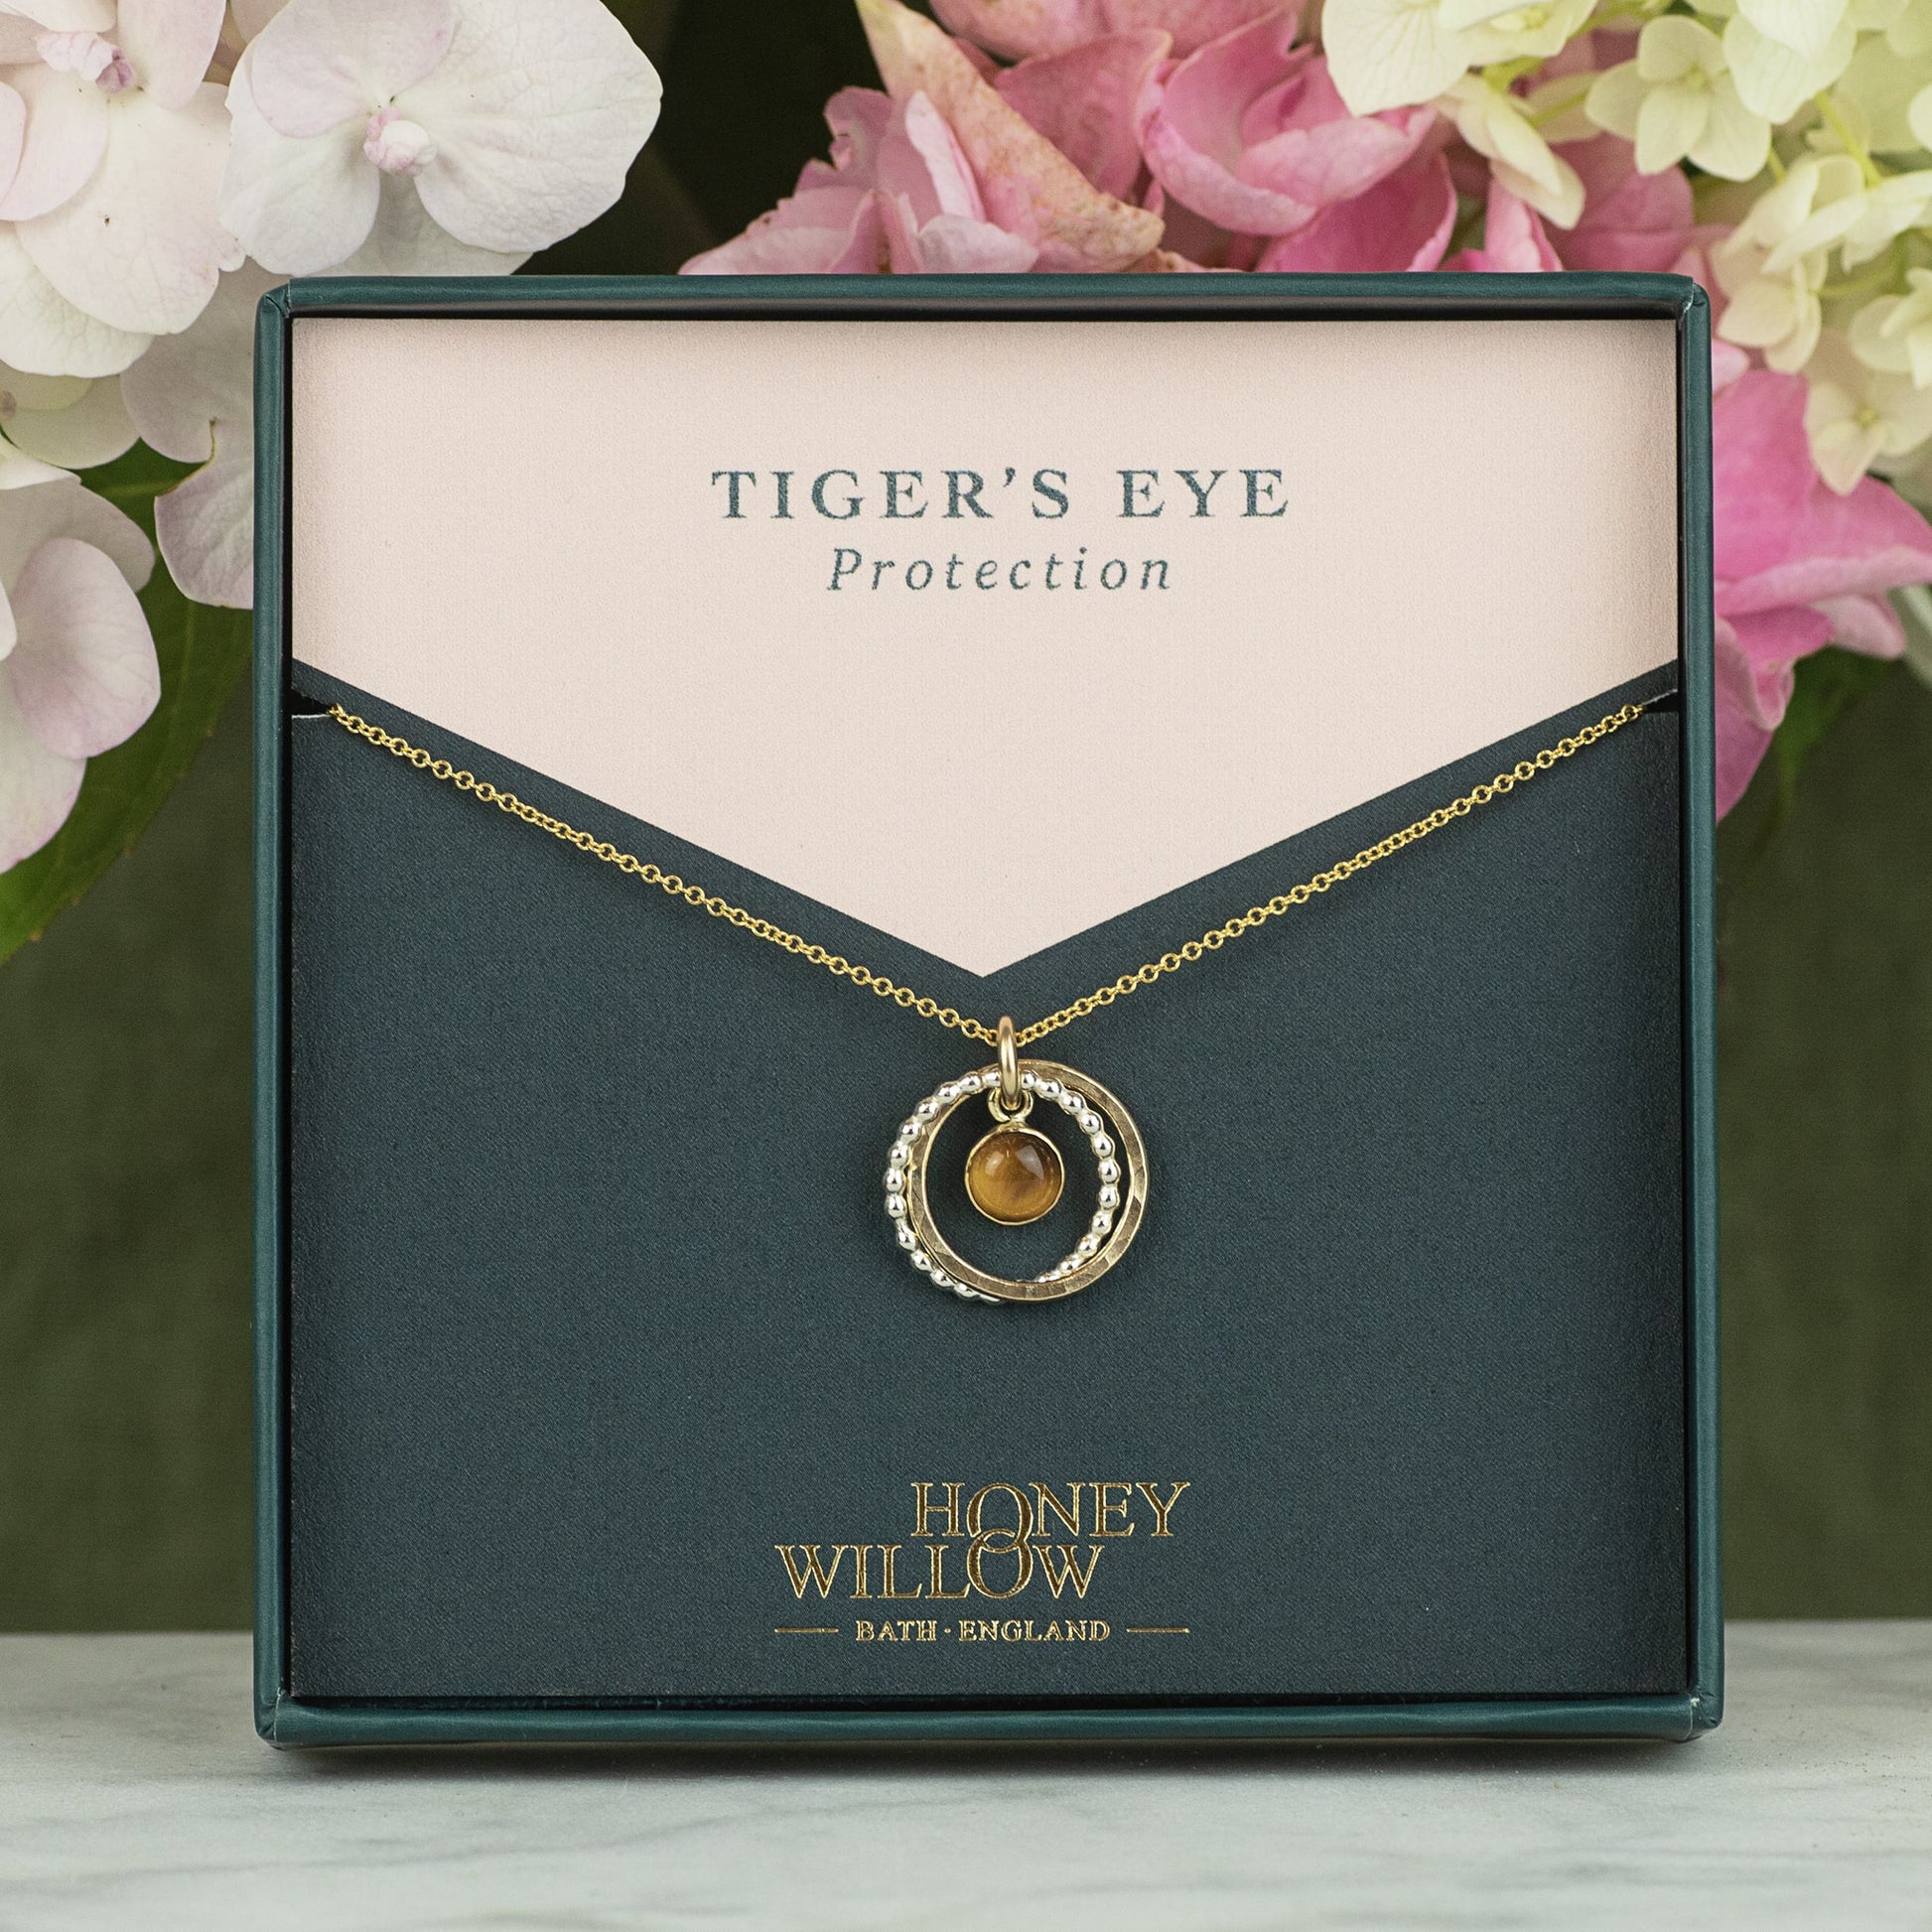 Tigers Eye Necklace - Protection - Silver & Gold